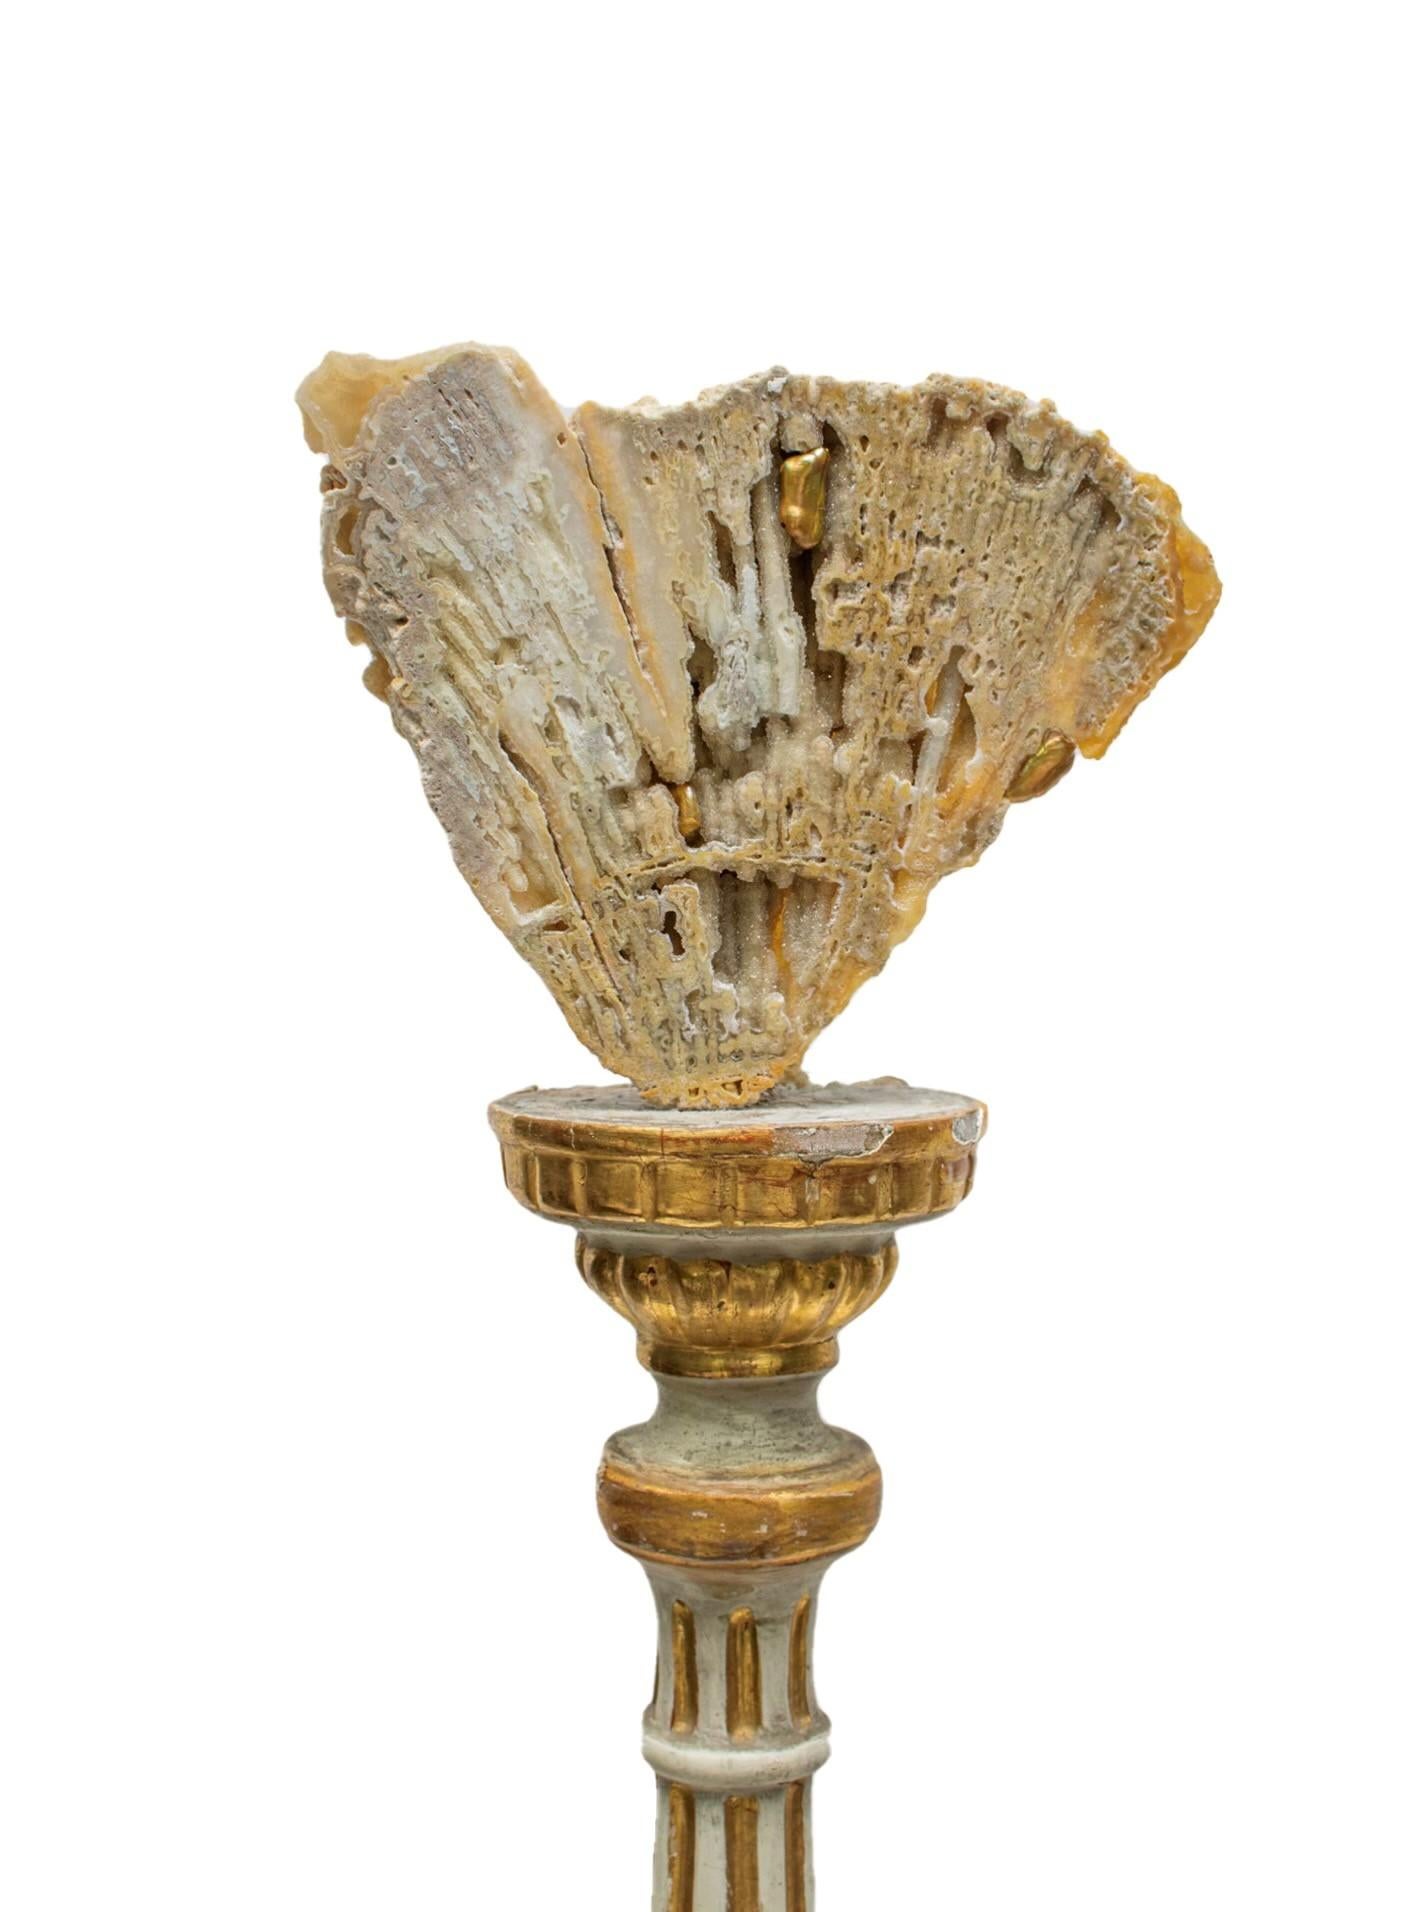 Pair of 18th Century Italian Gold Leaf Candlesticks with Fossil Agate Coral In Good Condition For Sale In Dublin, Dalkey